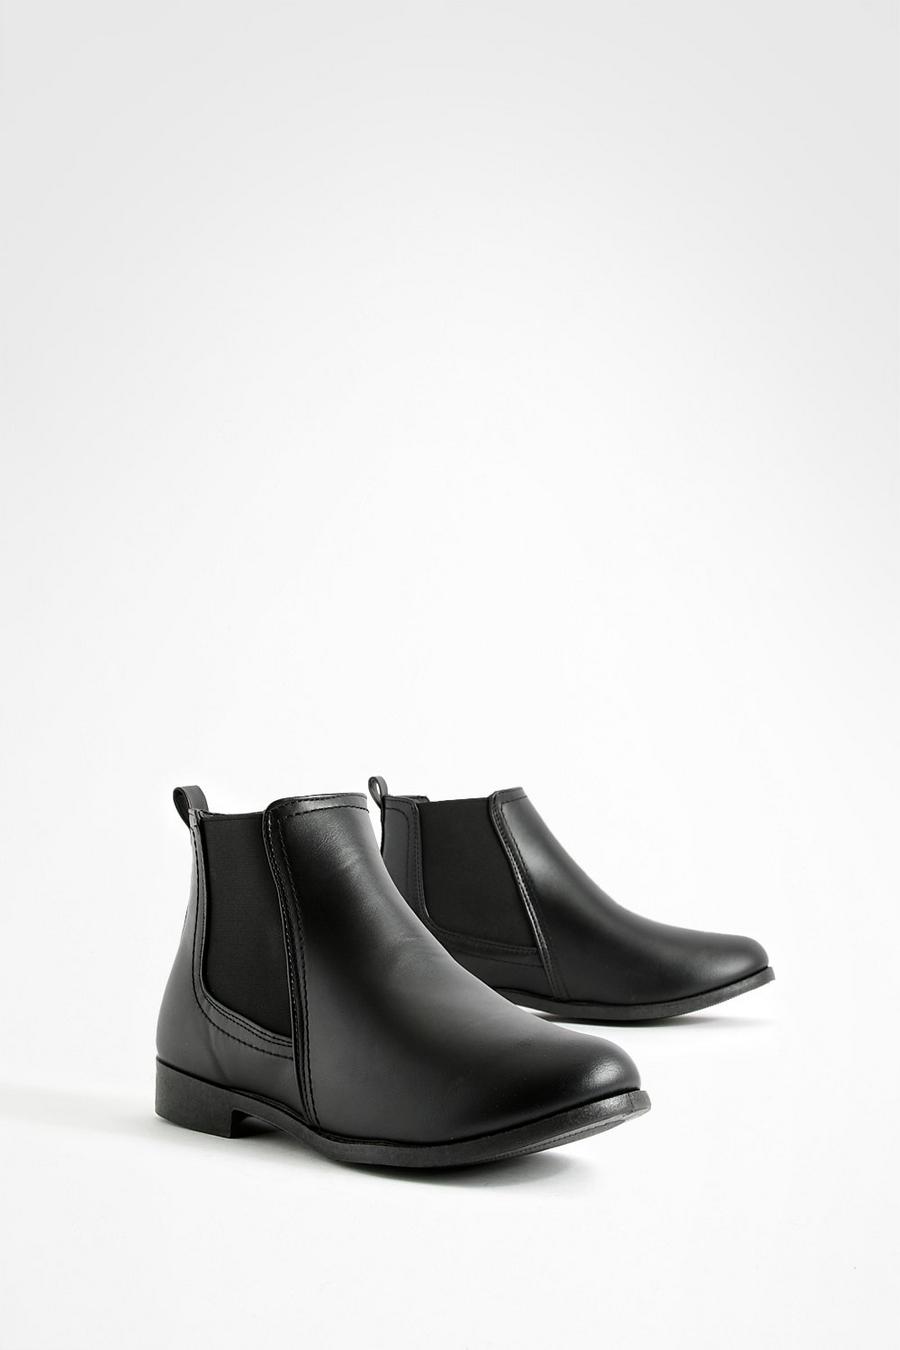 Black Wide Width Flat Chelsea Boots image number 1